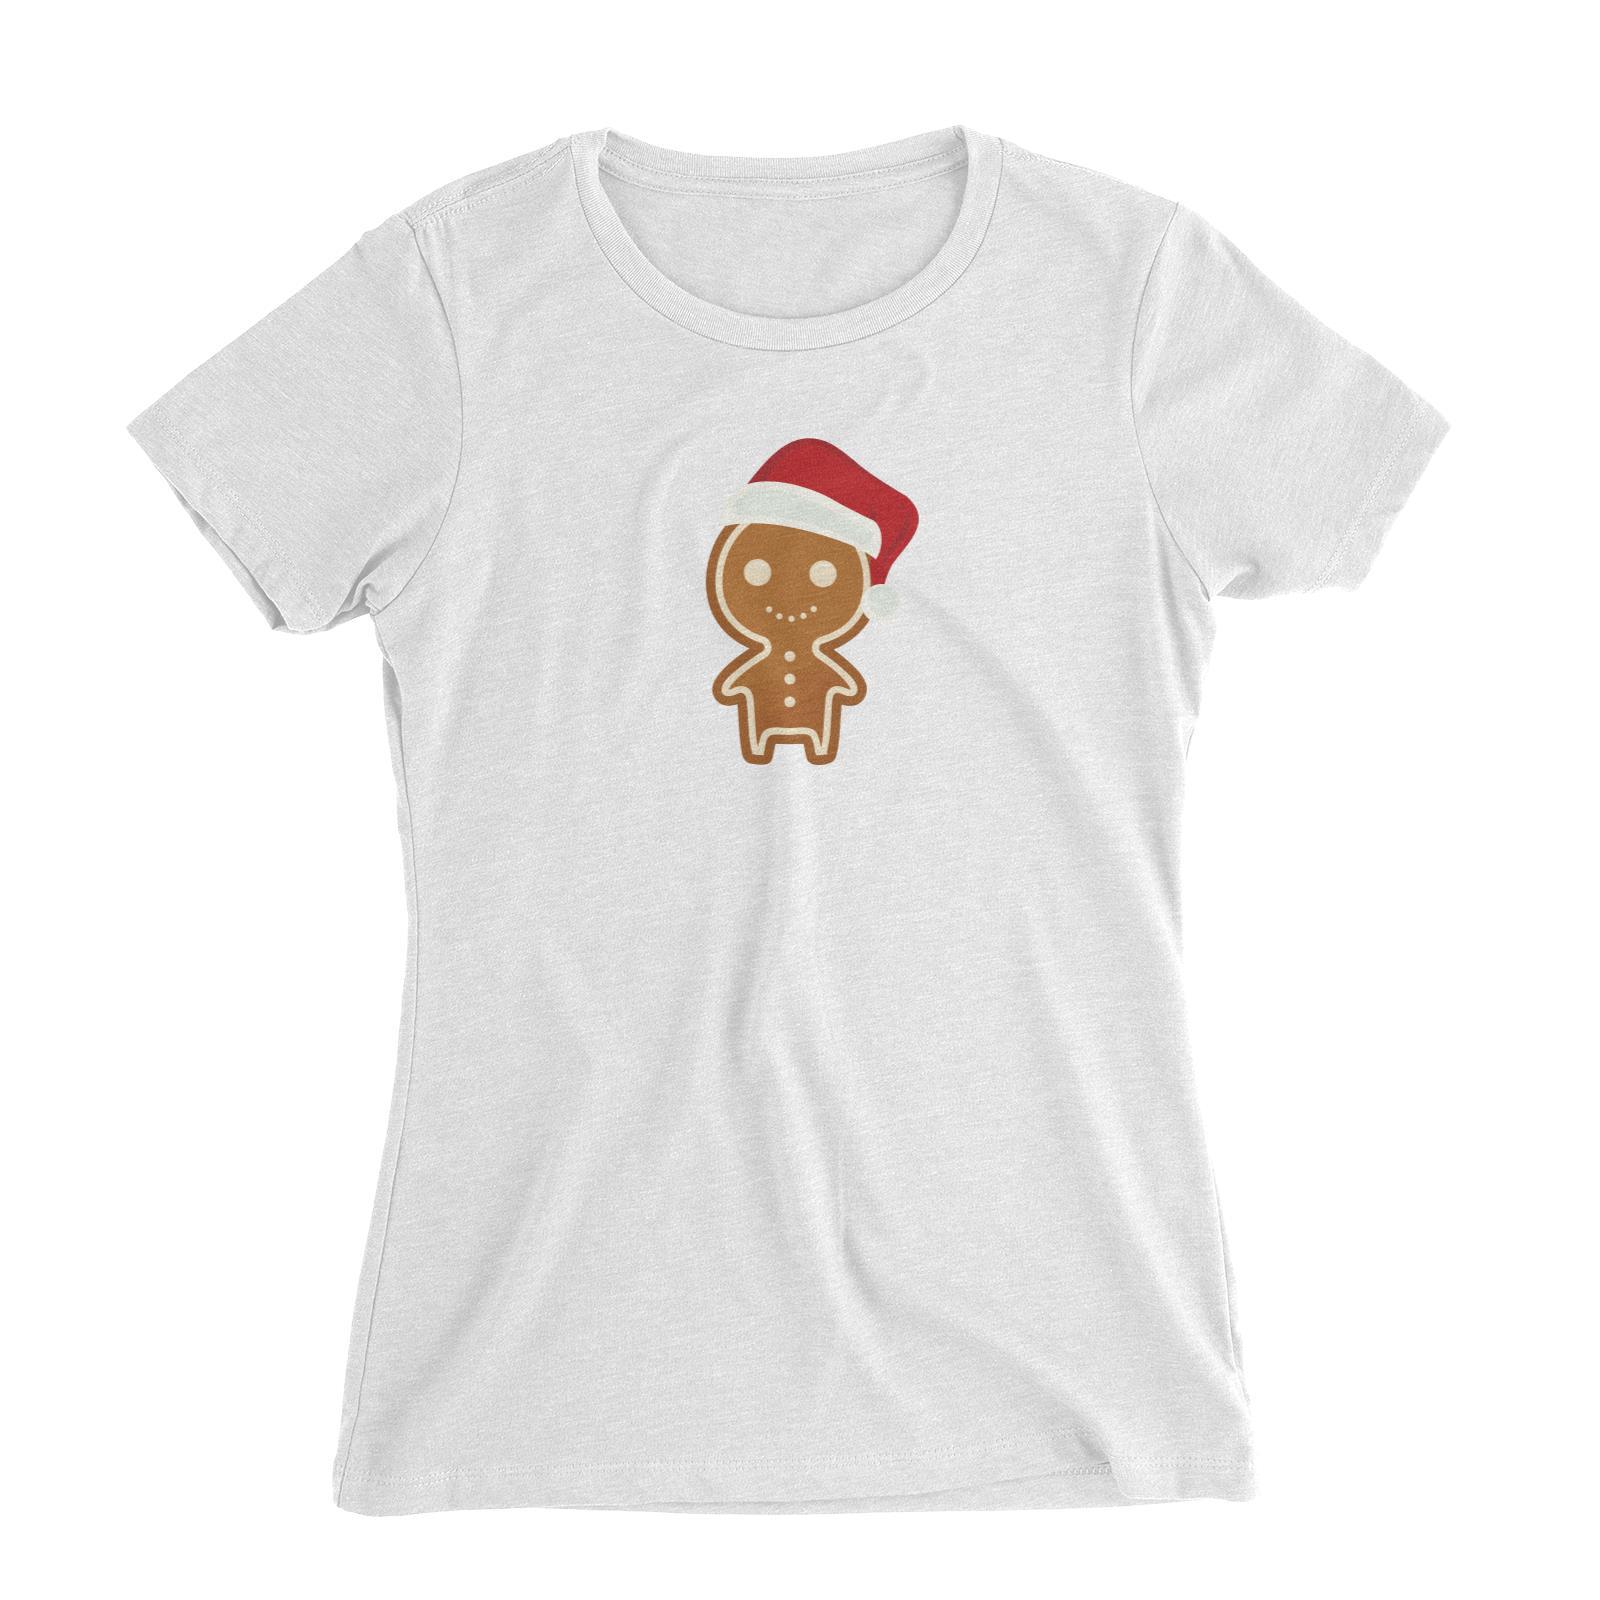 Cute Gingerbread Man with Santa Hat Women's Slim Fit T-Shirt Christmas Matching Family Funny